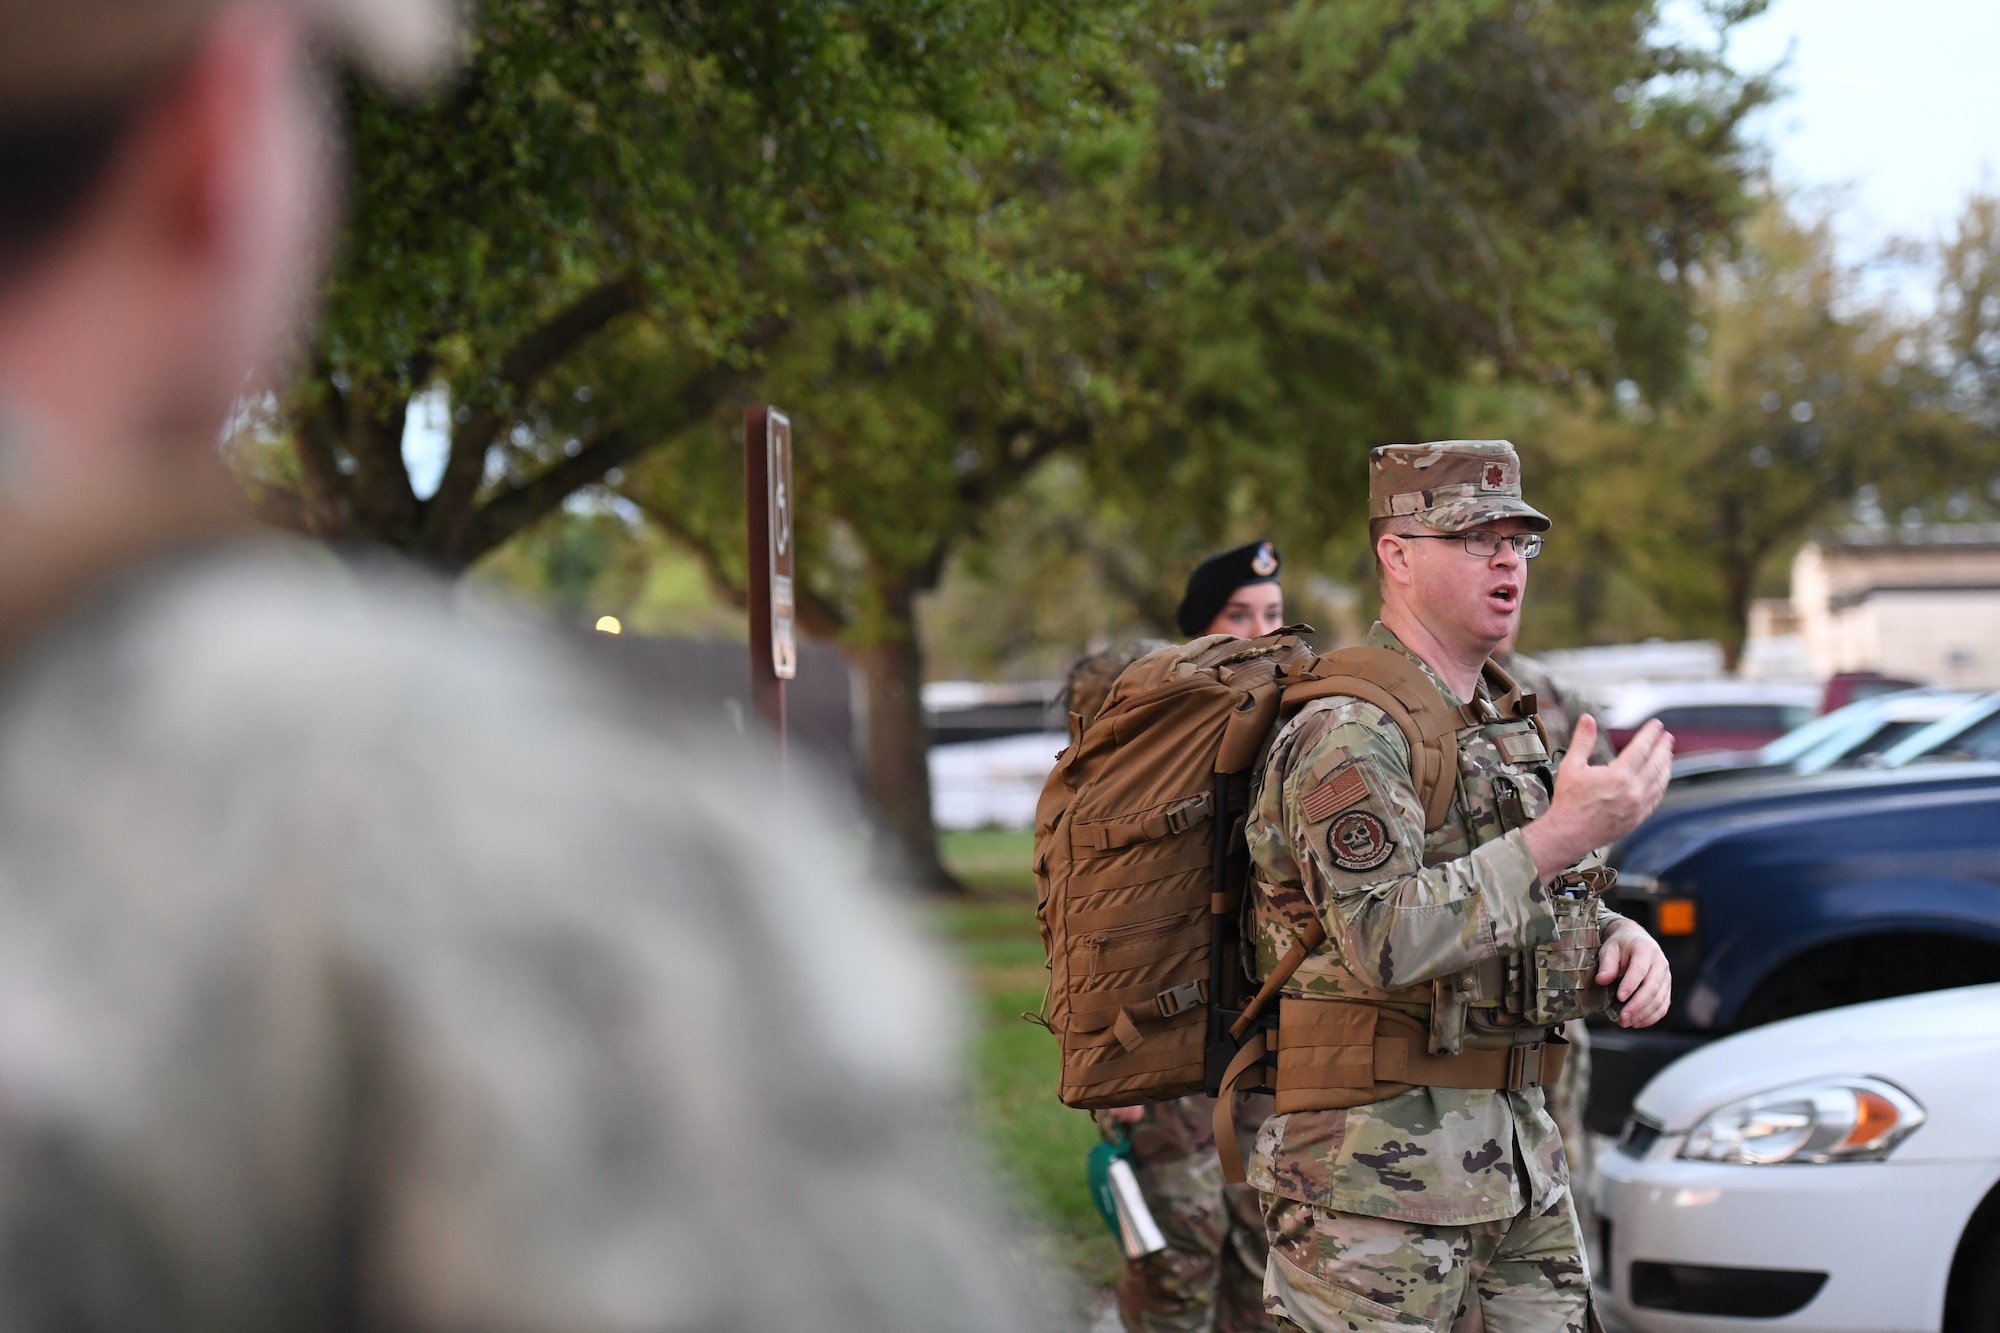 U.S. Air Force Maj. Shaun O’Dell, 81st Security Forces Squadron commander, delivers welcoming remarks during the K-9 Veteran's Day Ruck & Demonstration at Keesler Air Force Base, Mississippi, March 13, 2023.